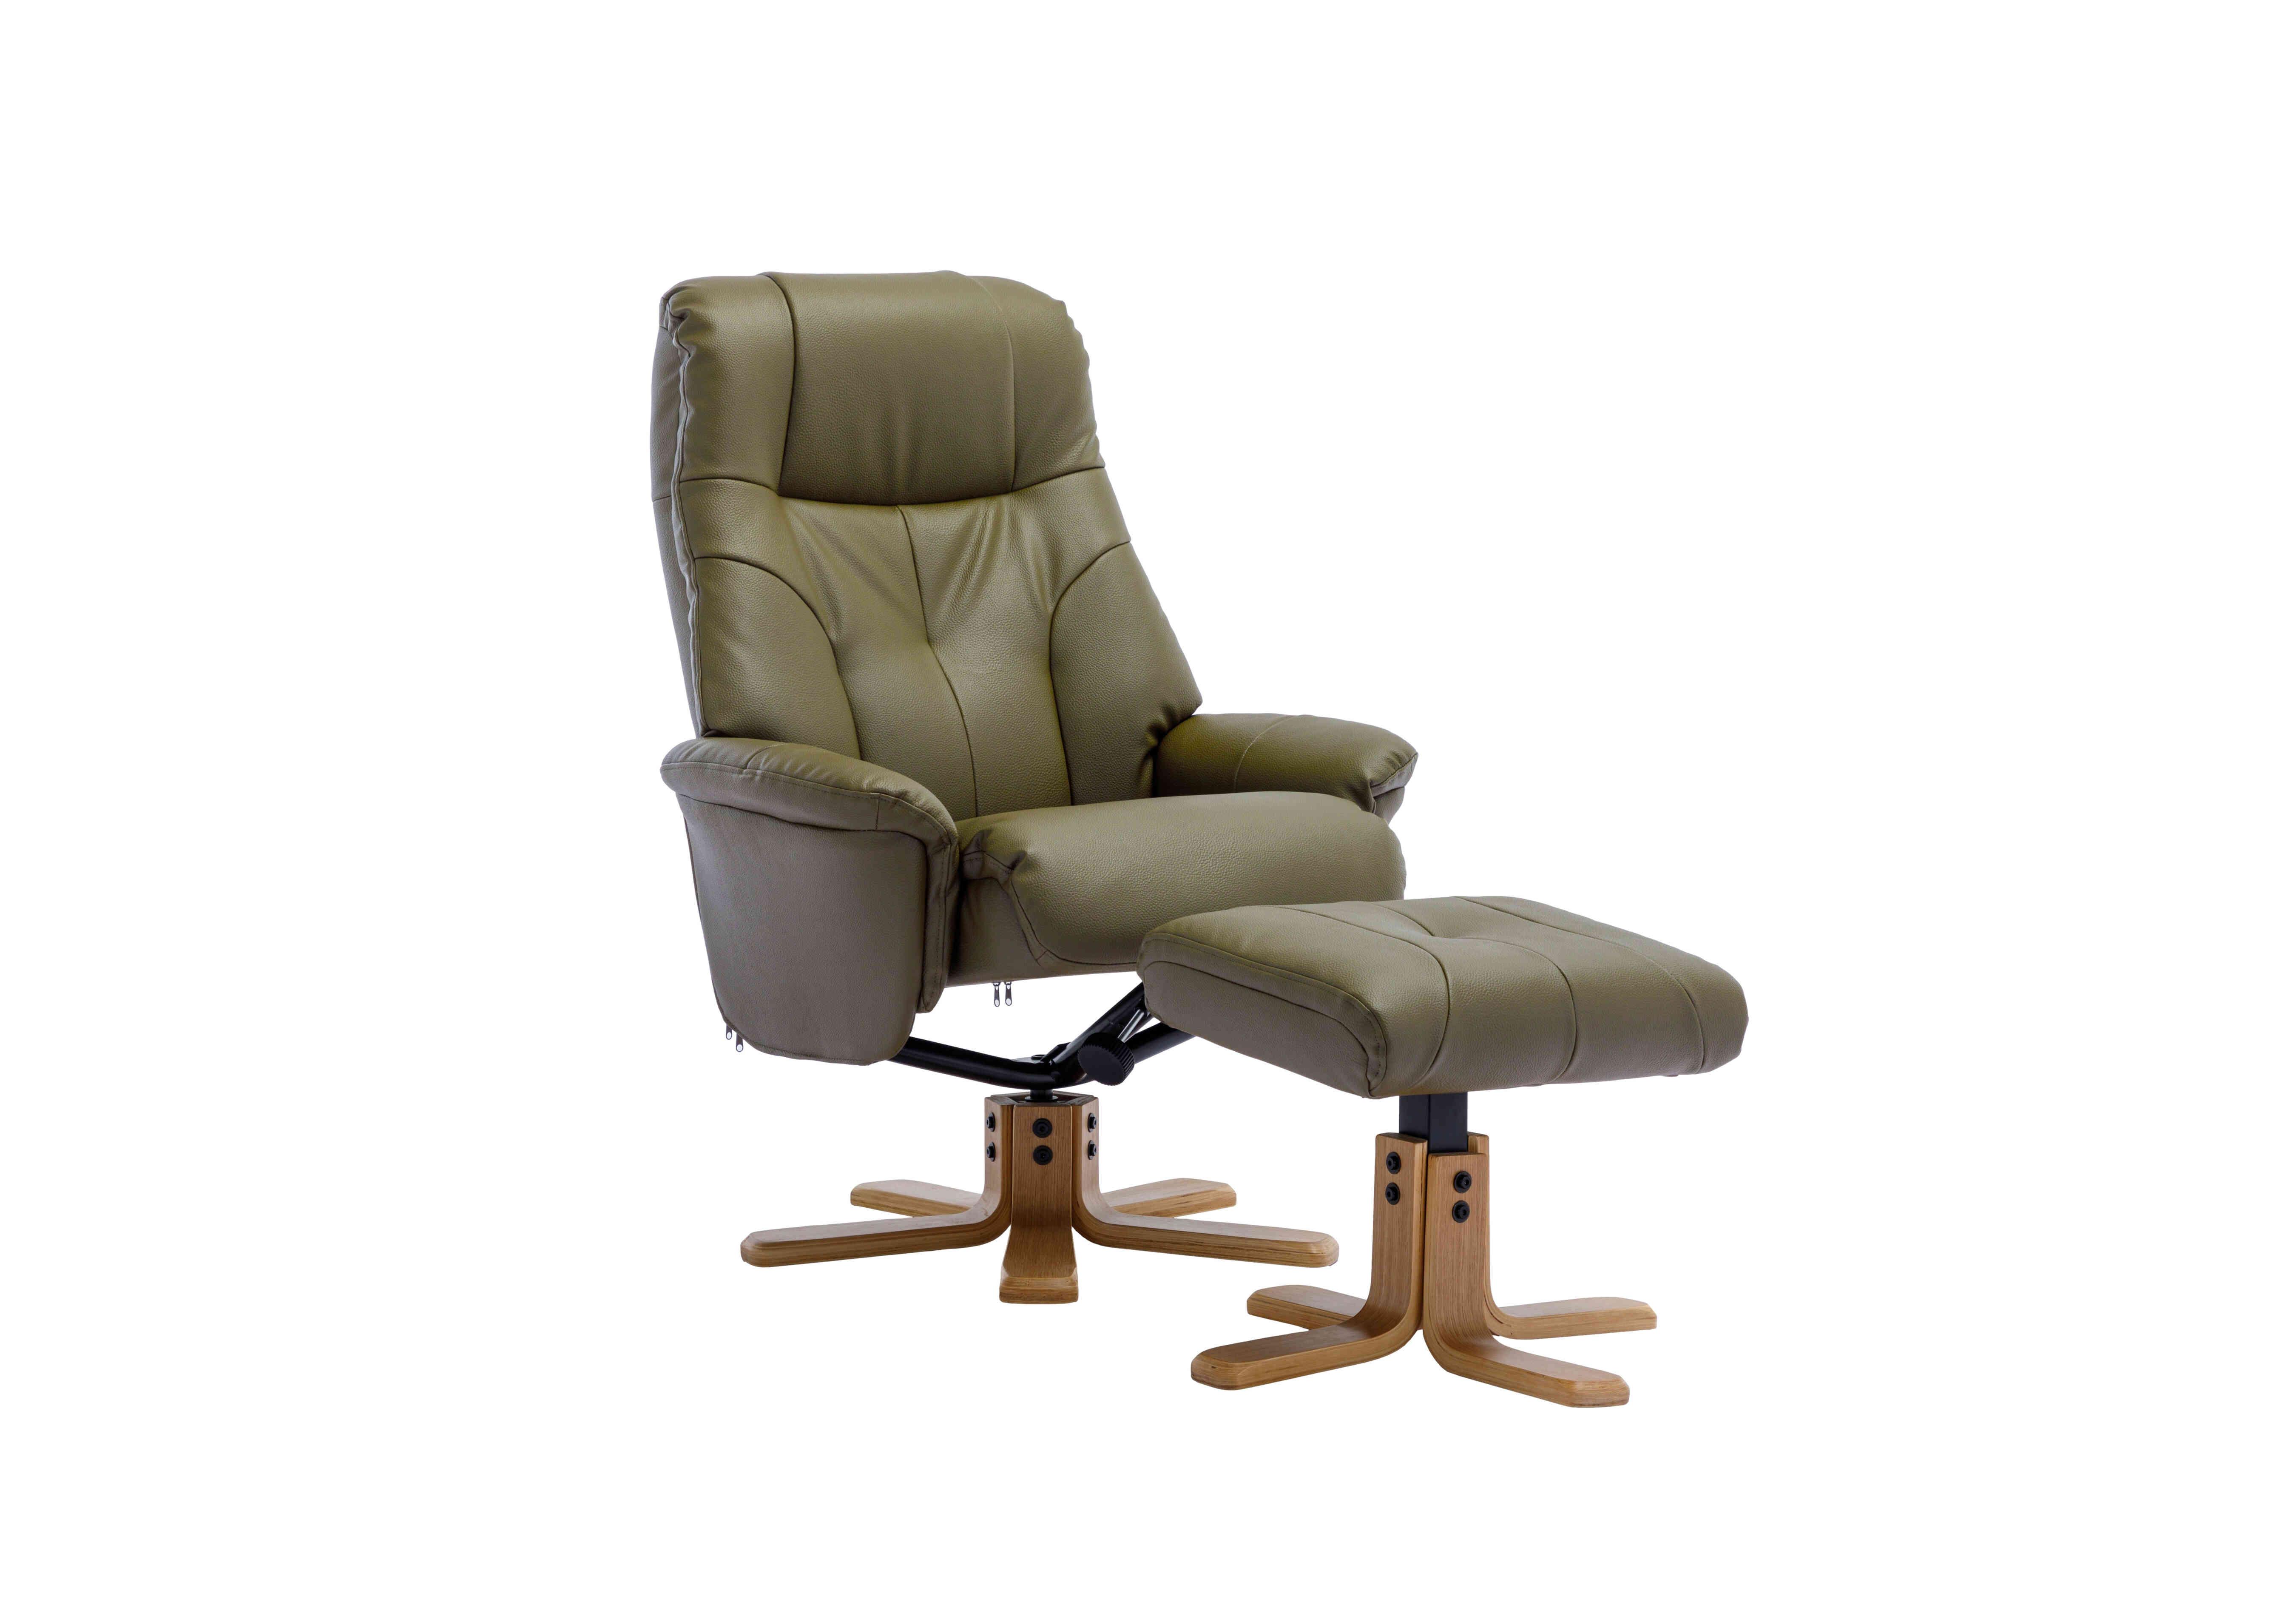 Muscat Faux Leather Swivel Recliner Chair and Footstool in Olive Green Plush on Furniture Village